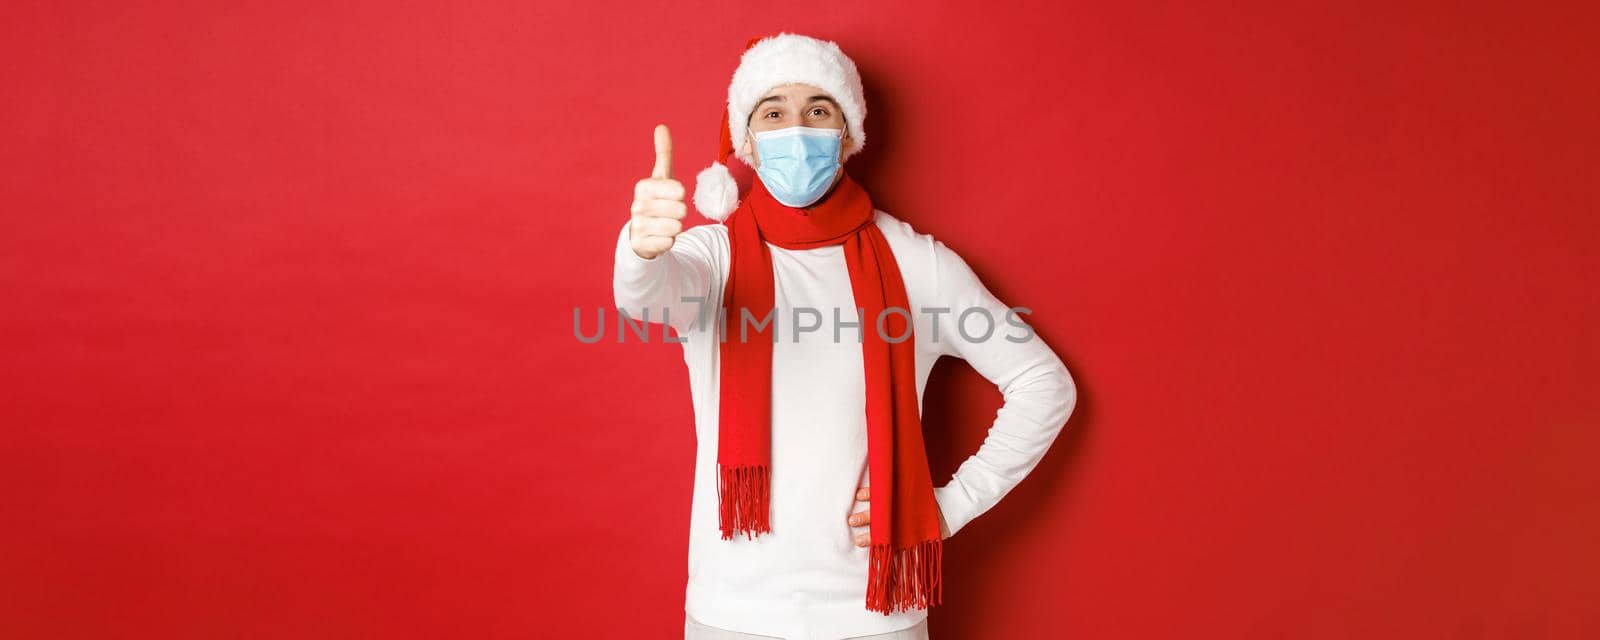 Concept of covid-19, christmas and holidays during pandemic. Cheerful handsome man in medical mask and santa hat, showing thumb-up, celebrating new year and social distancing.